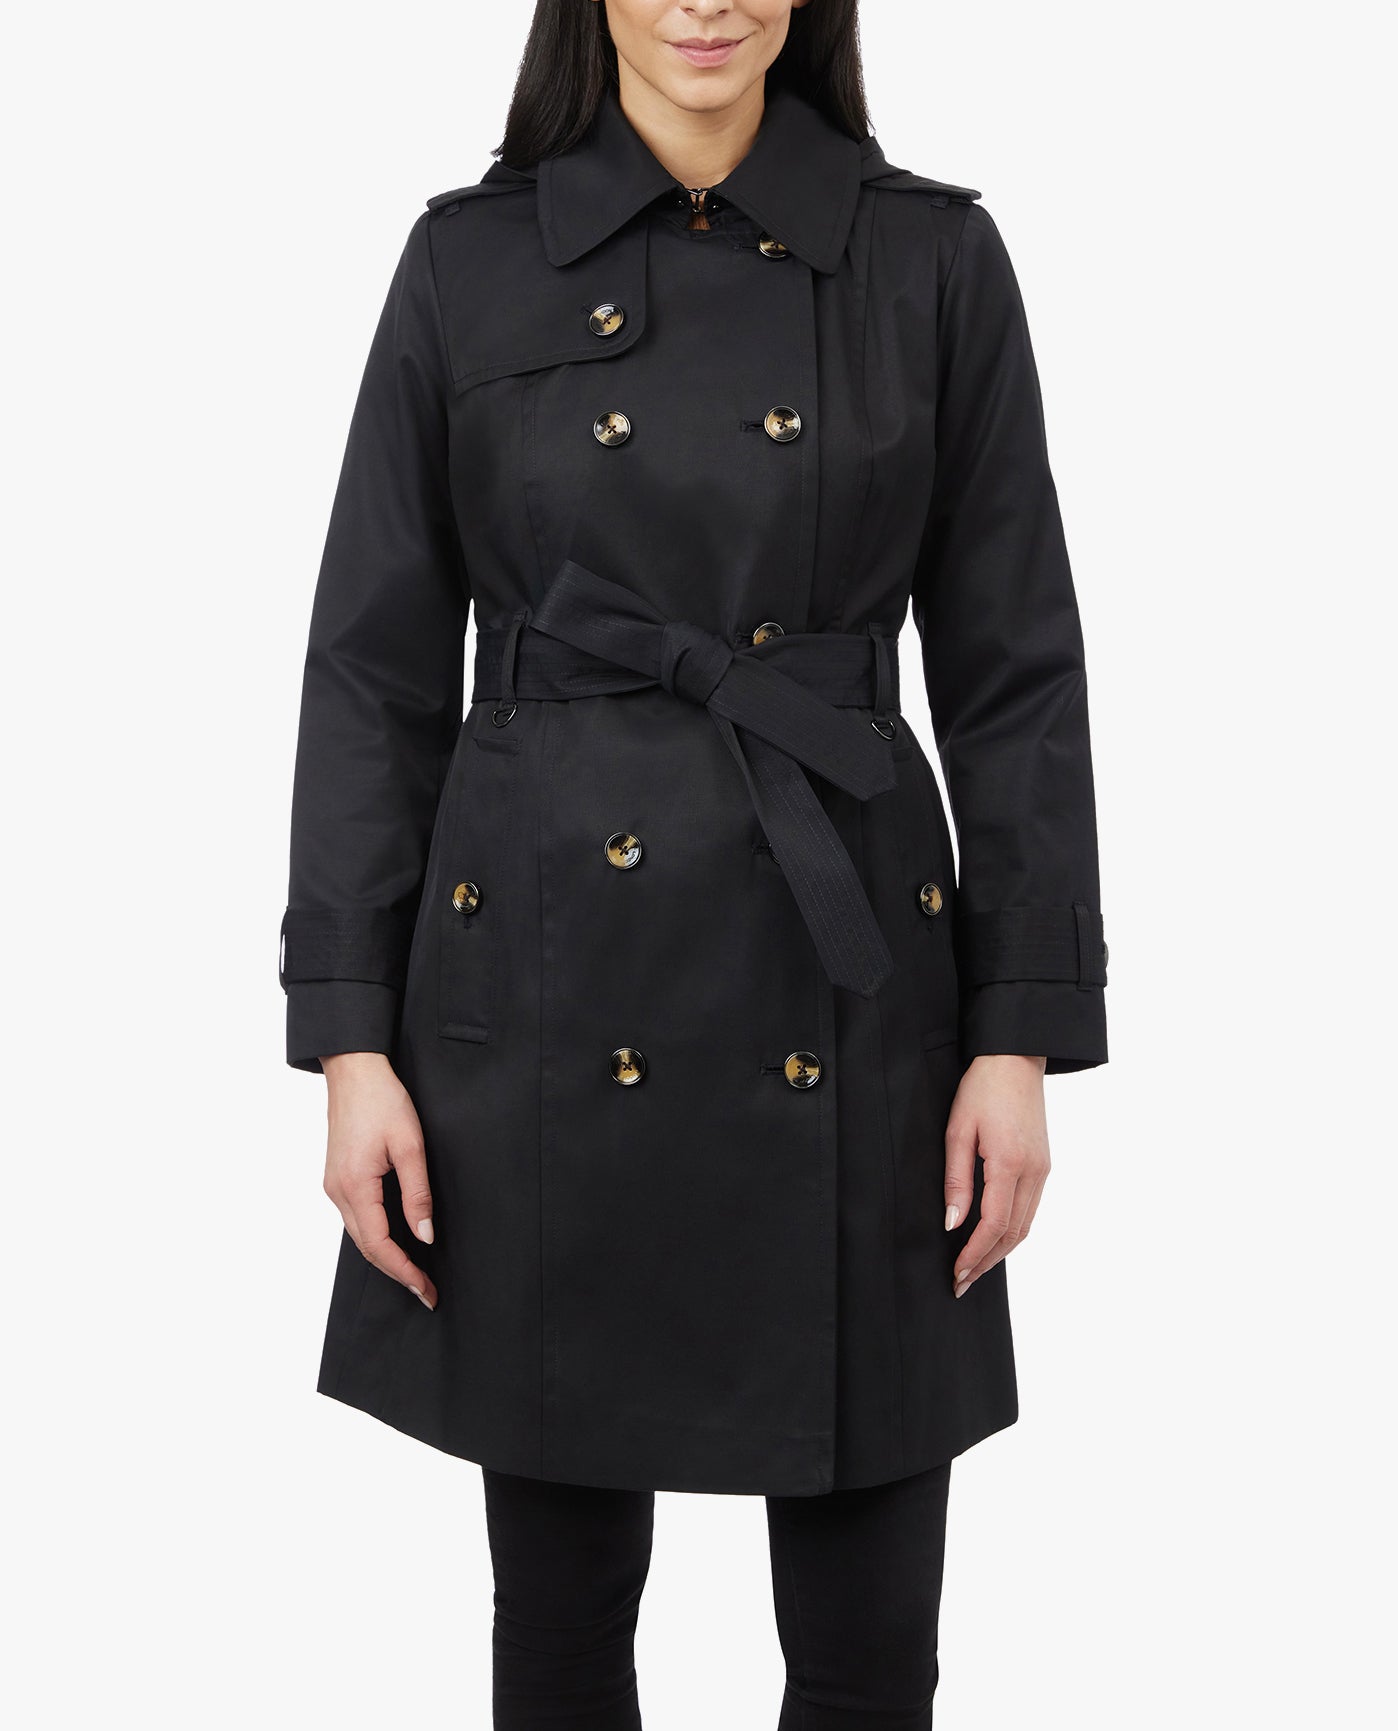 FRONT VIEW OF DOUBLE BREASTED HOODED TRENCH COAT WITH WAIST BELT | BLACK